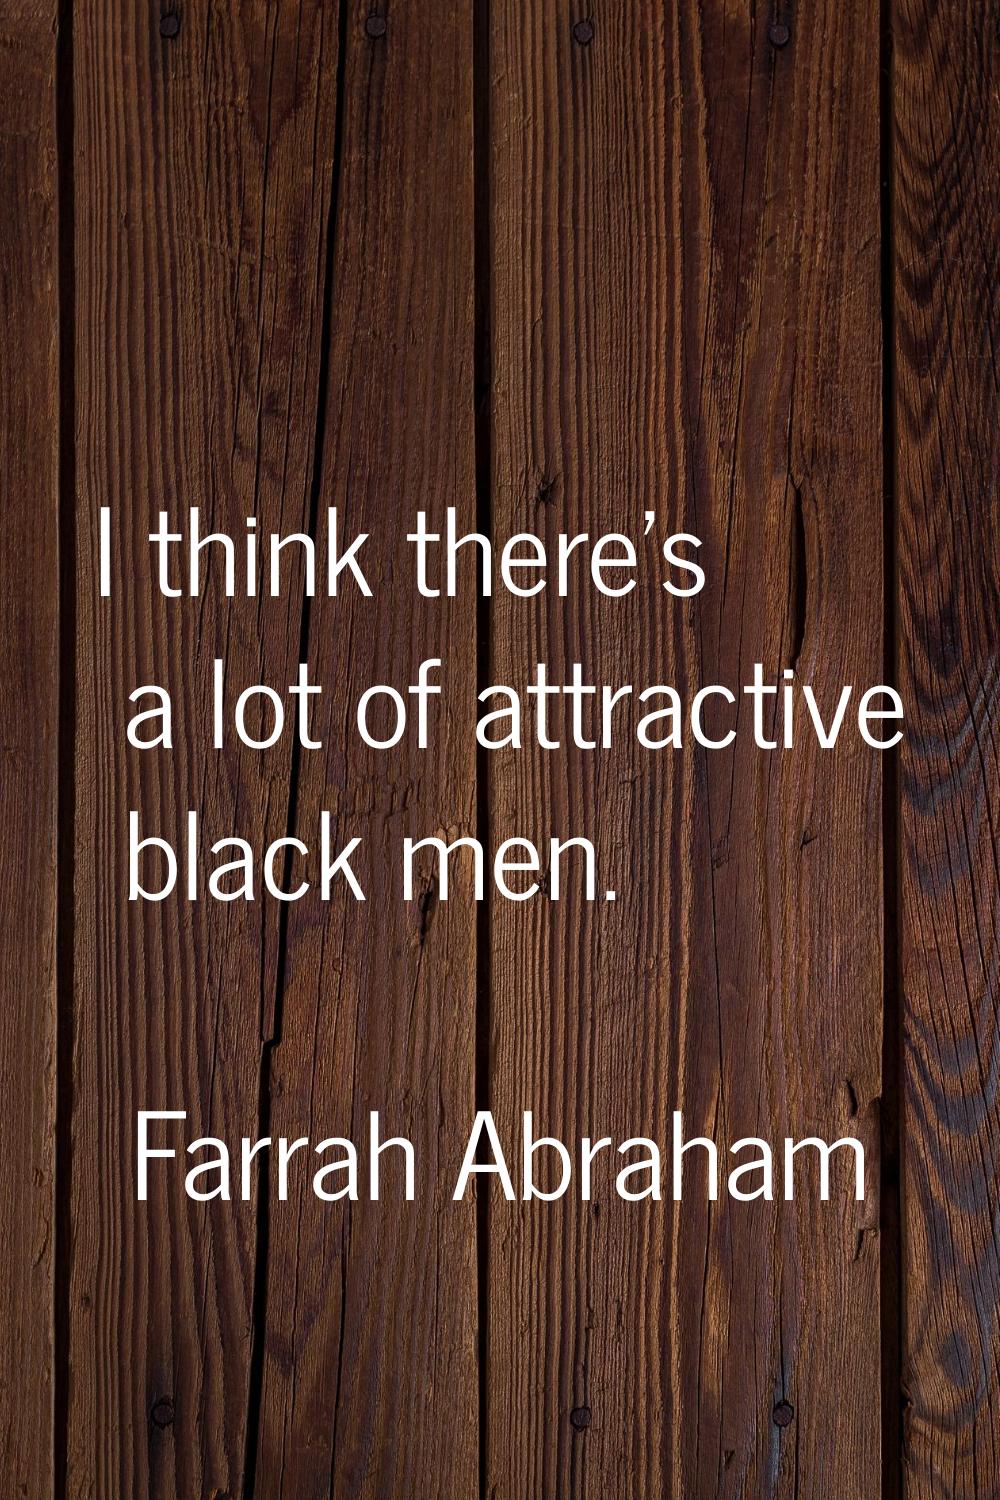 I think there's a lot of attractive black men.